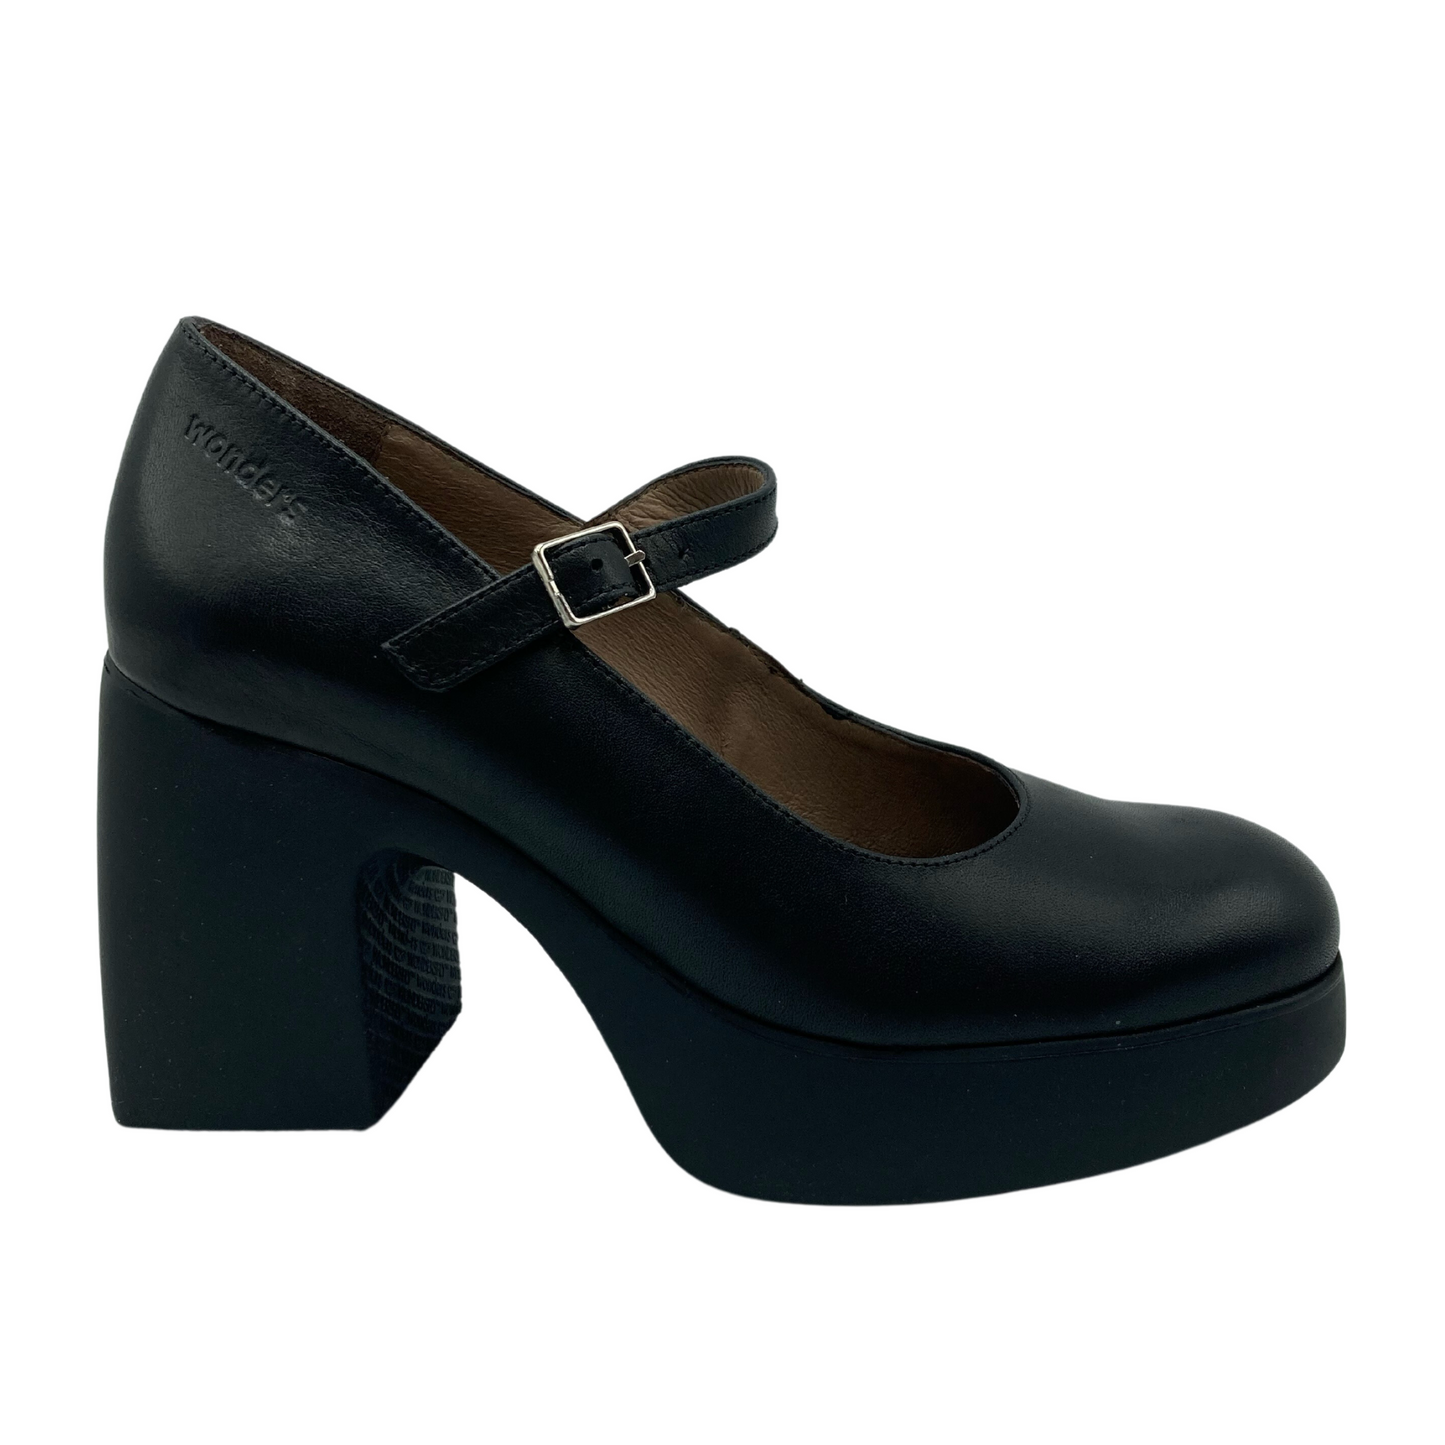 Side view of black leather Mary Jane heel